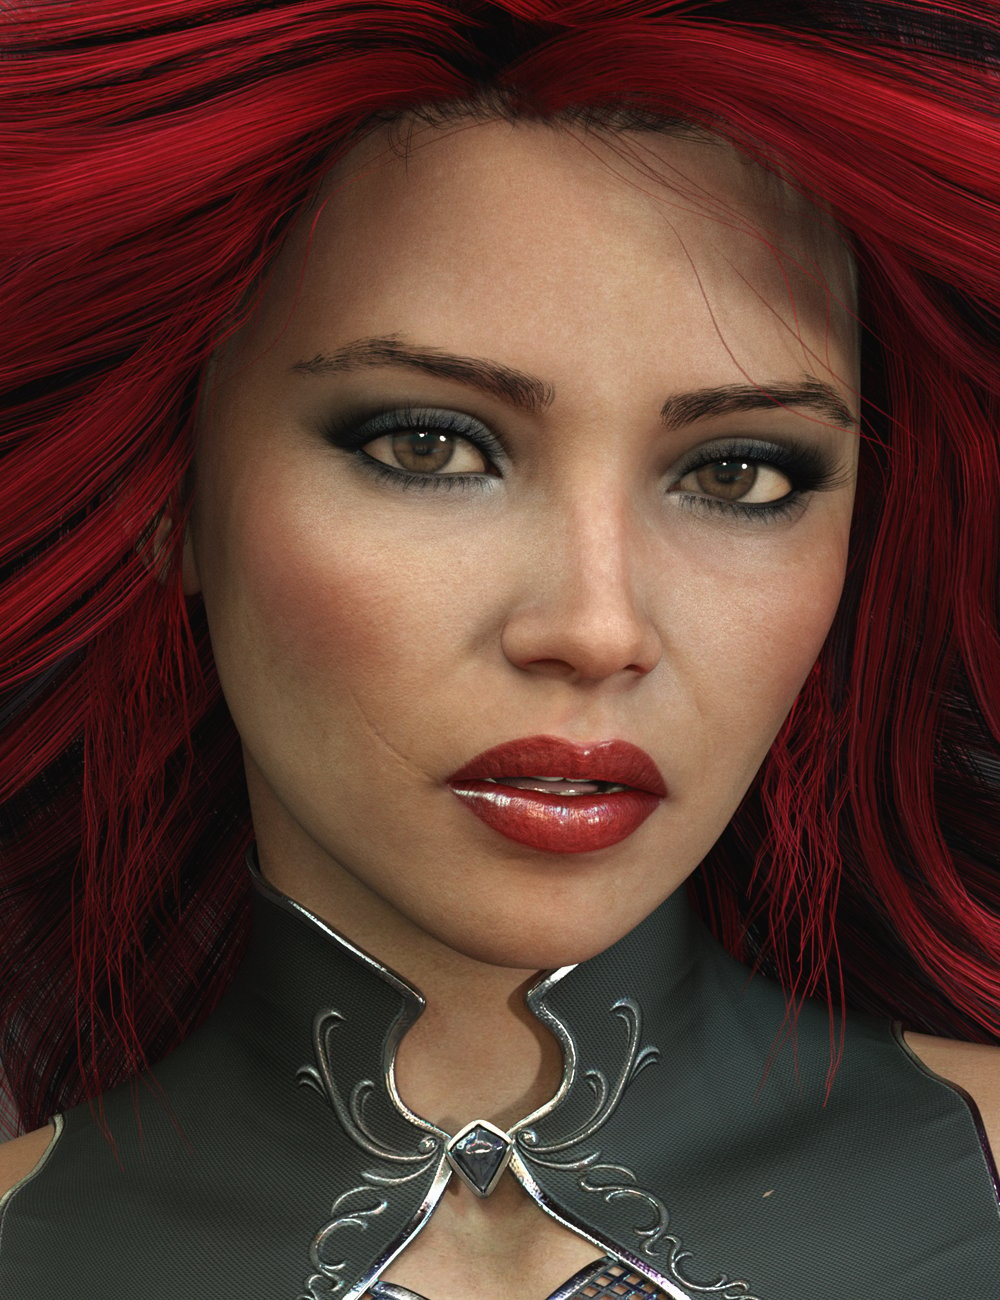 Sohnia HD for Angharad 8 by: Emrys, 3D Models by Daz 3D